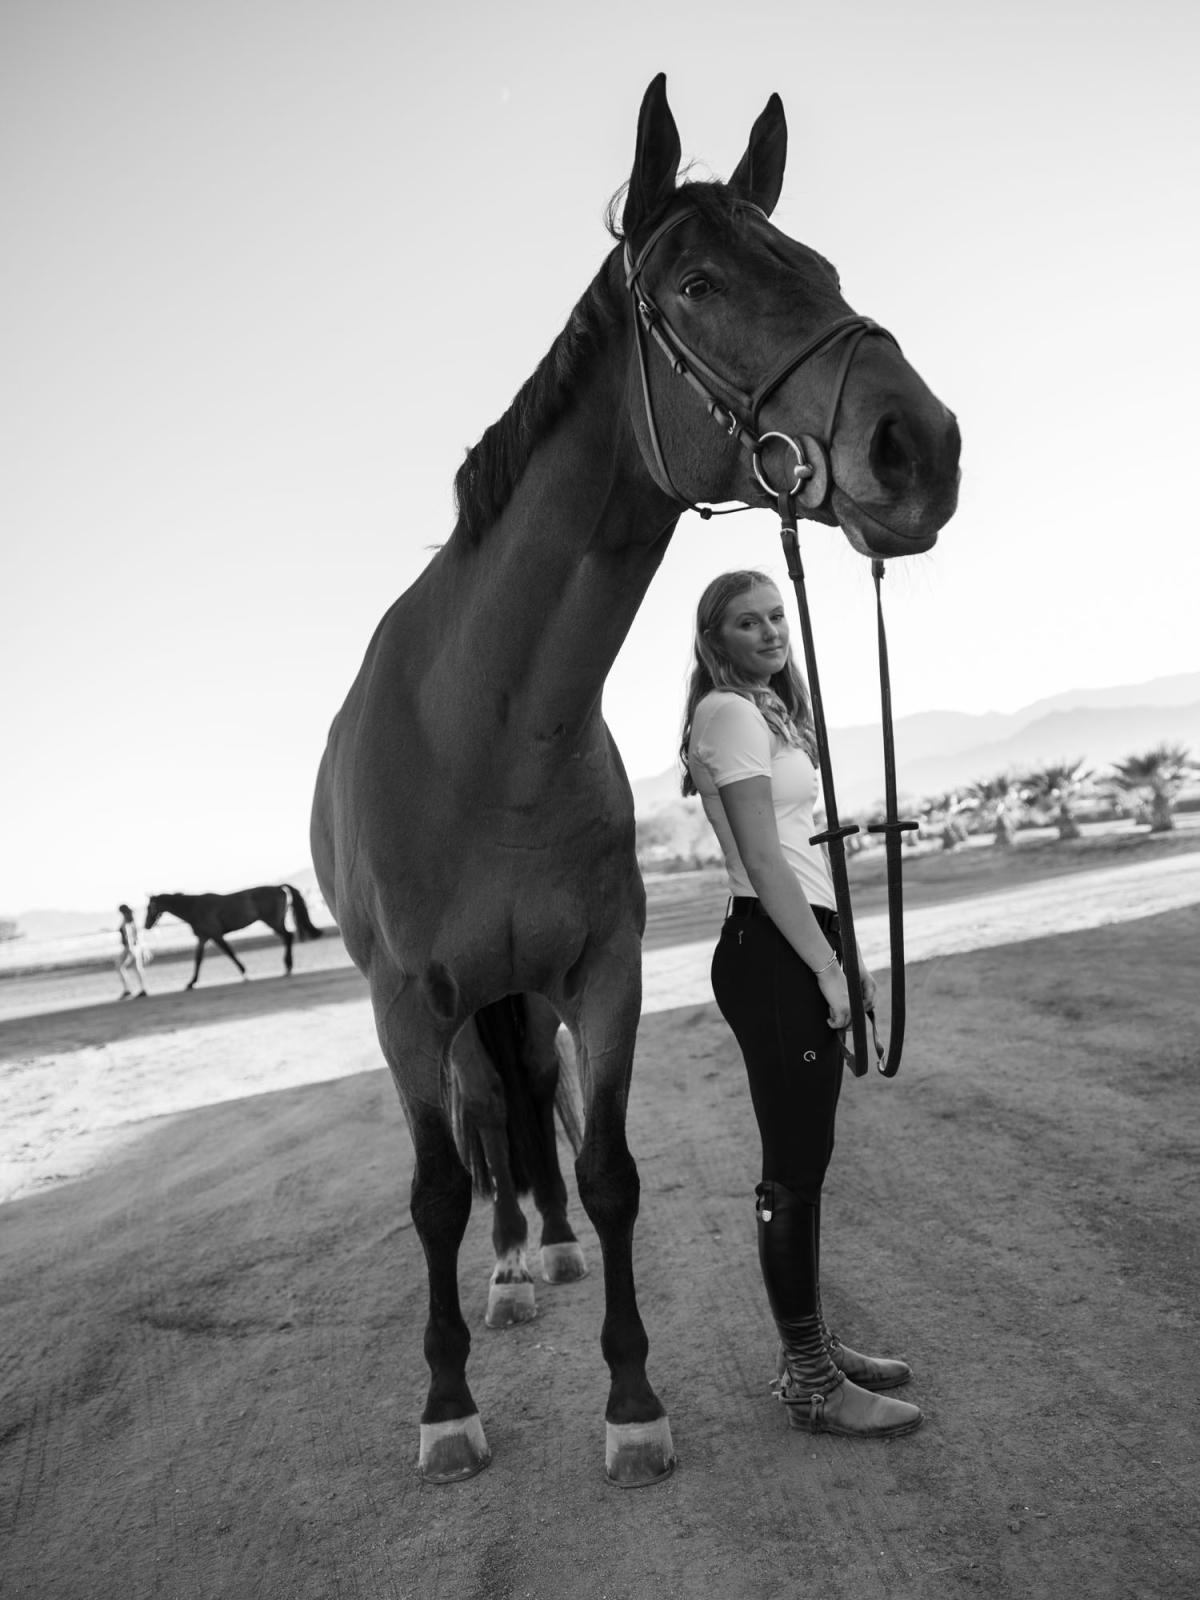 Maggie Kehring with her mother&#39;s horse, Agano, at the Desert International Horse Park. Now 19, Maggie is an equestrian who has competed internationally for the United States. She recounts being coerced into a relationship with her coach, Rich Fellers, after repeatedly saying no, when she was 16, and he was 60. Following a SafeSport investigation, Fellers was suspended from the sport. When SafeSport referred the case to the Oregon police, he was arrested on four counts of second-degree sexual abuse. The age of consent in Oregon is 18. His trial date is expected to be set in April 2022.